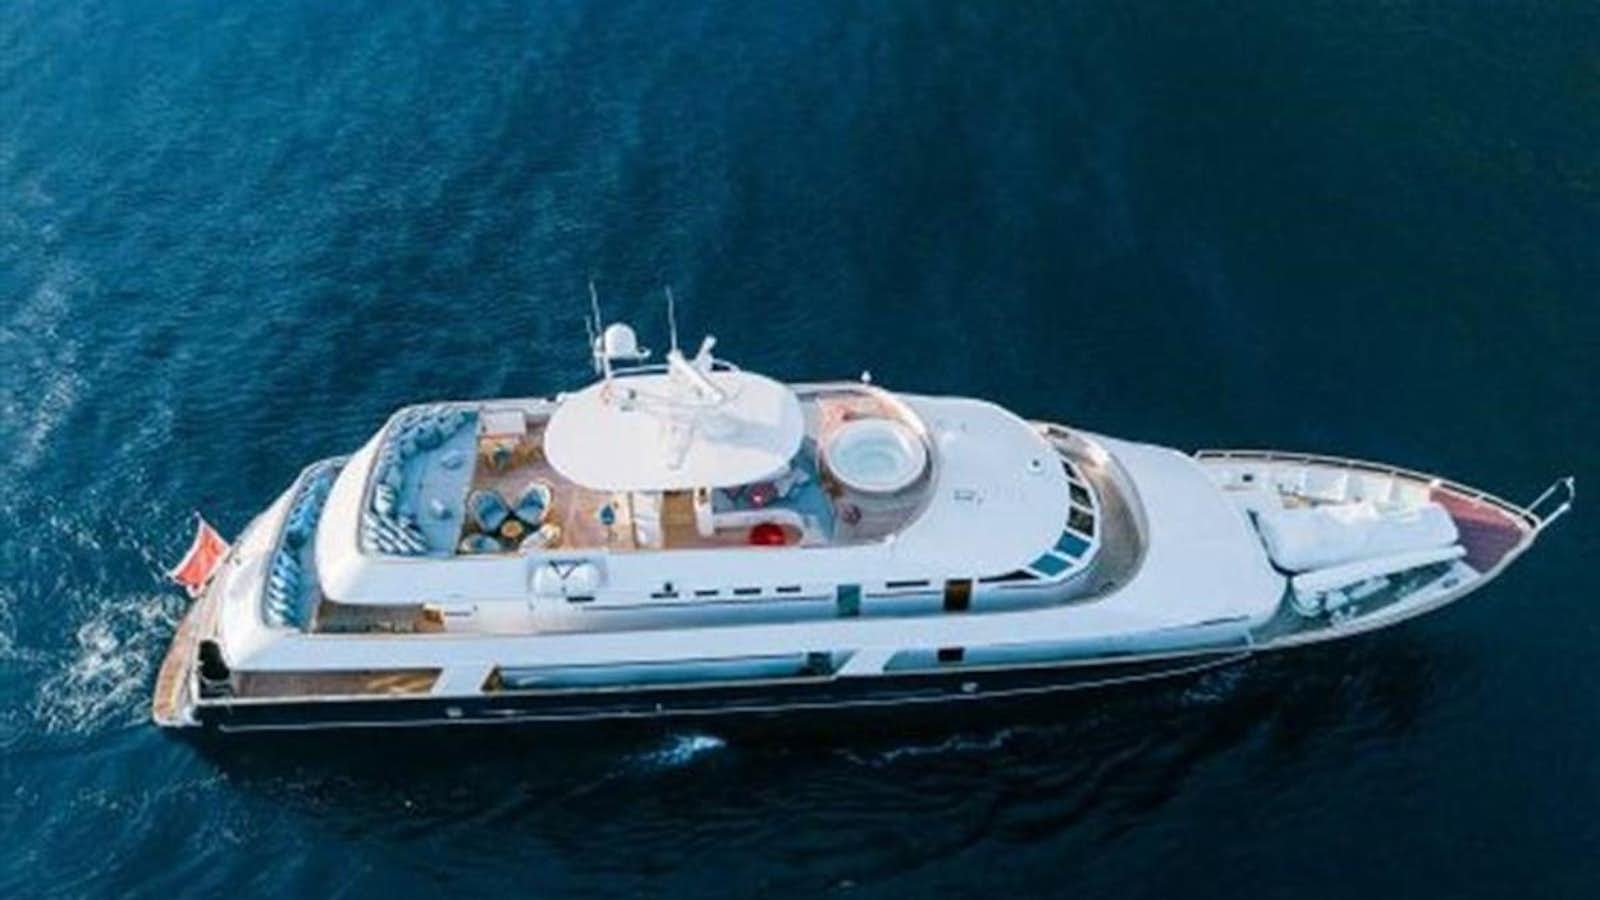 Watch Video for CHESELLA Yacht for Sale